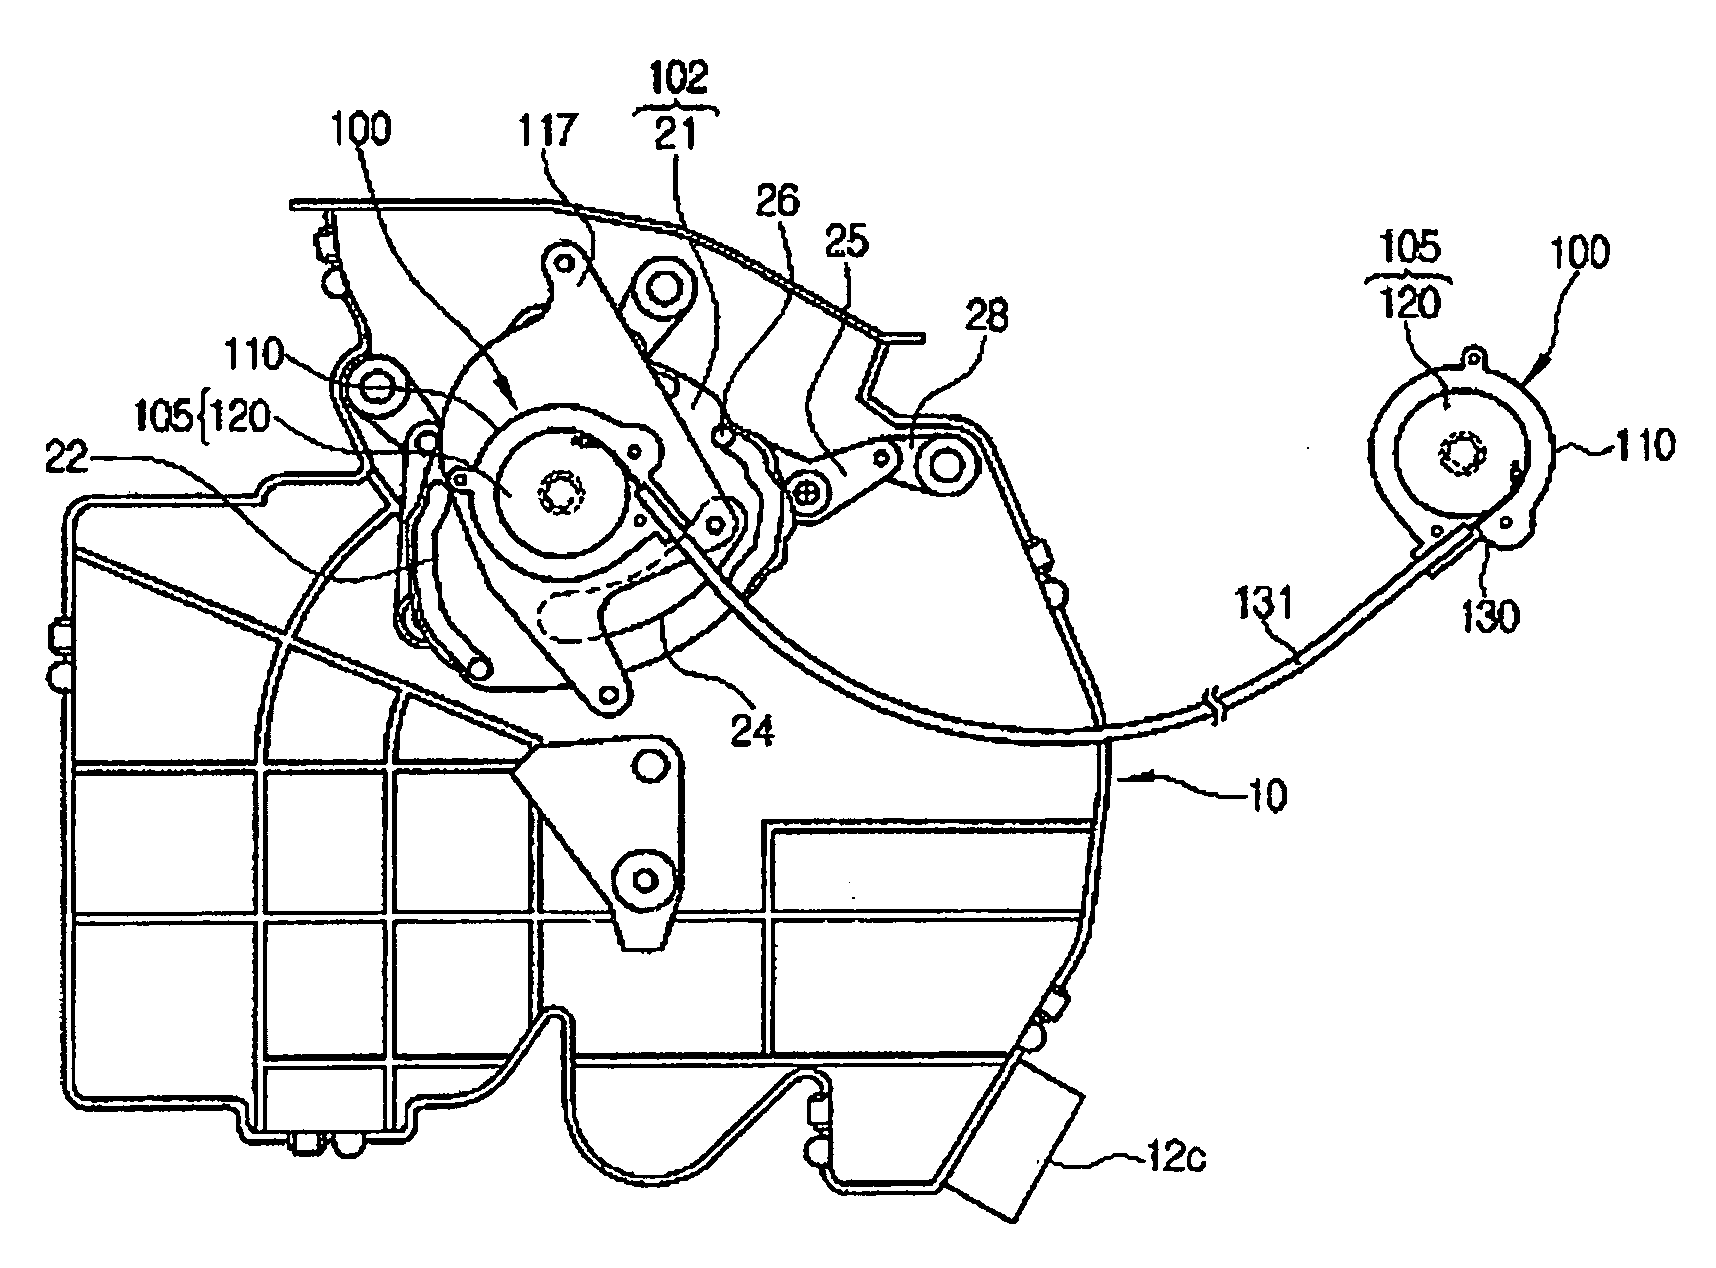 Cable connecting apparatus of controller for air conditoner in vehicle